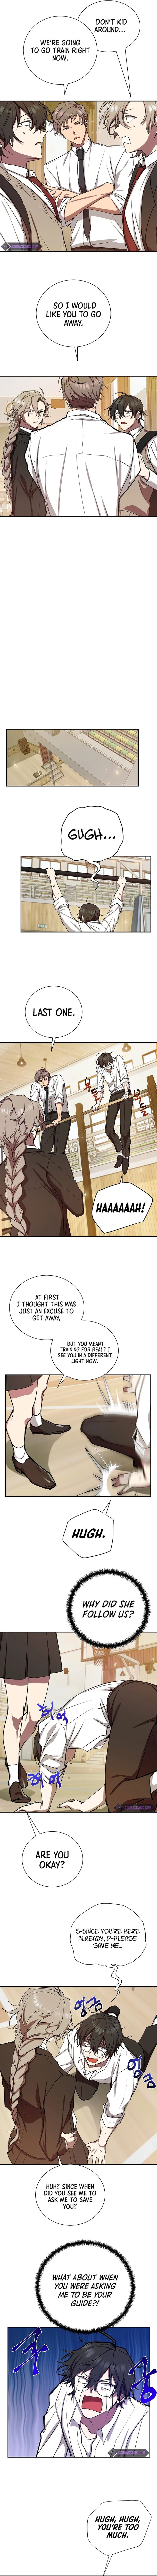 My School Life Pretending To Be a Worthless Person - Chapter 8 Page 9